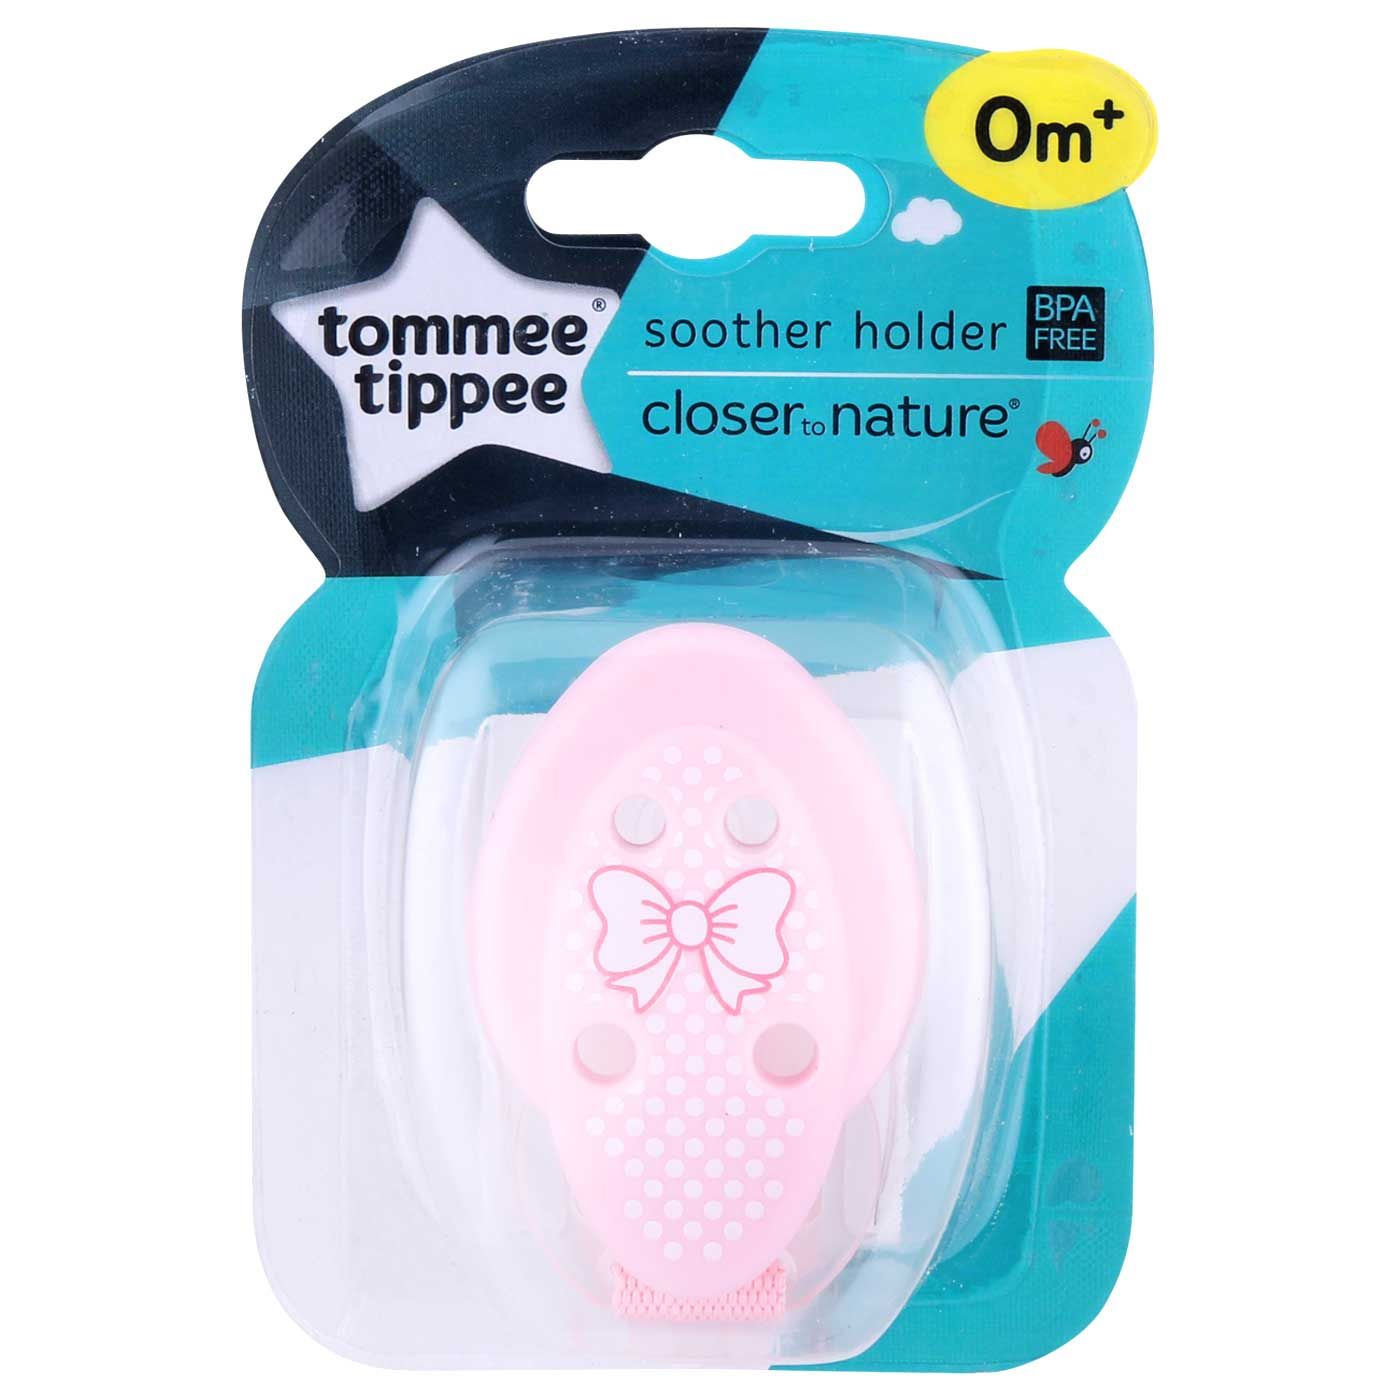 Tommee Tippee CTN Soother Holder